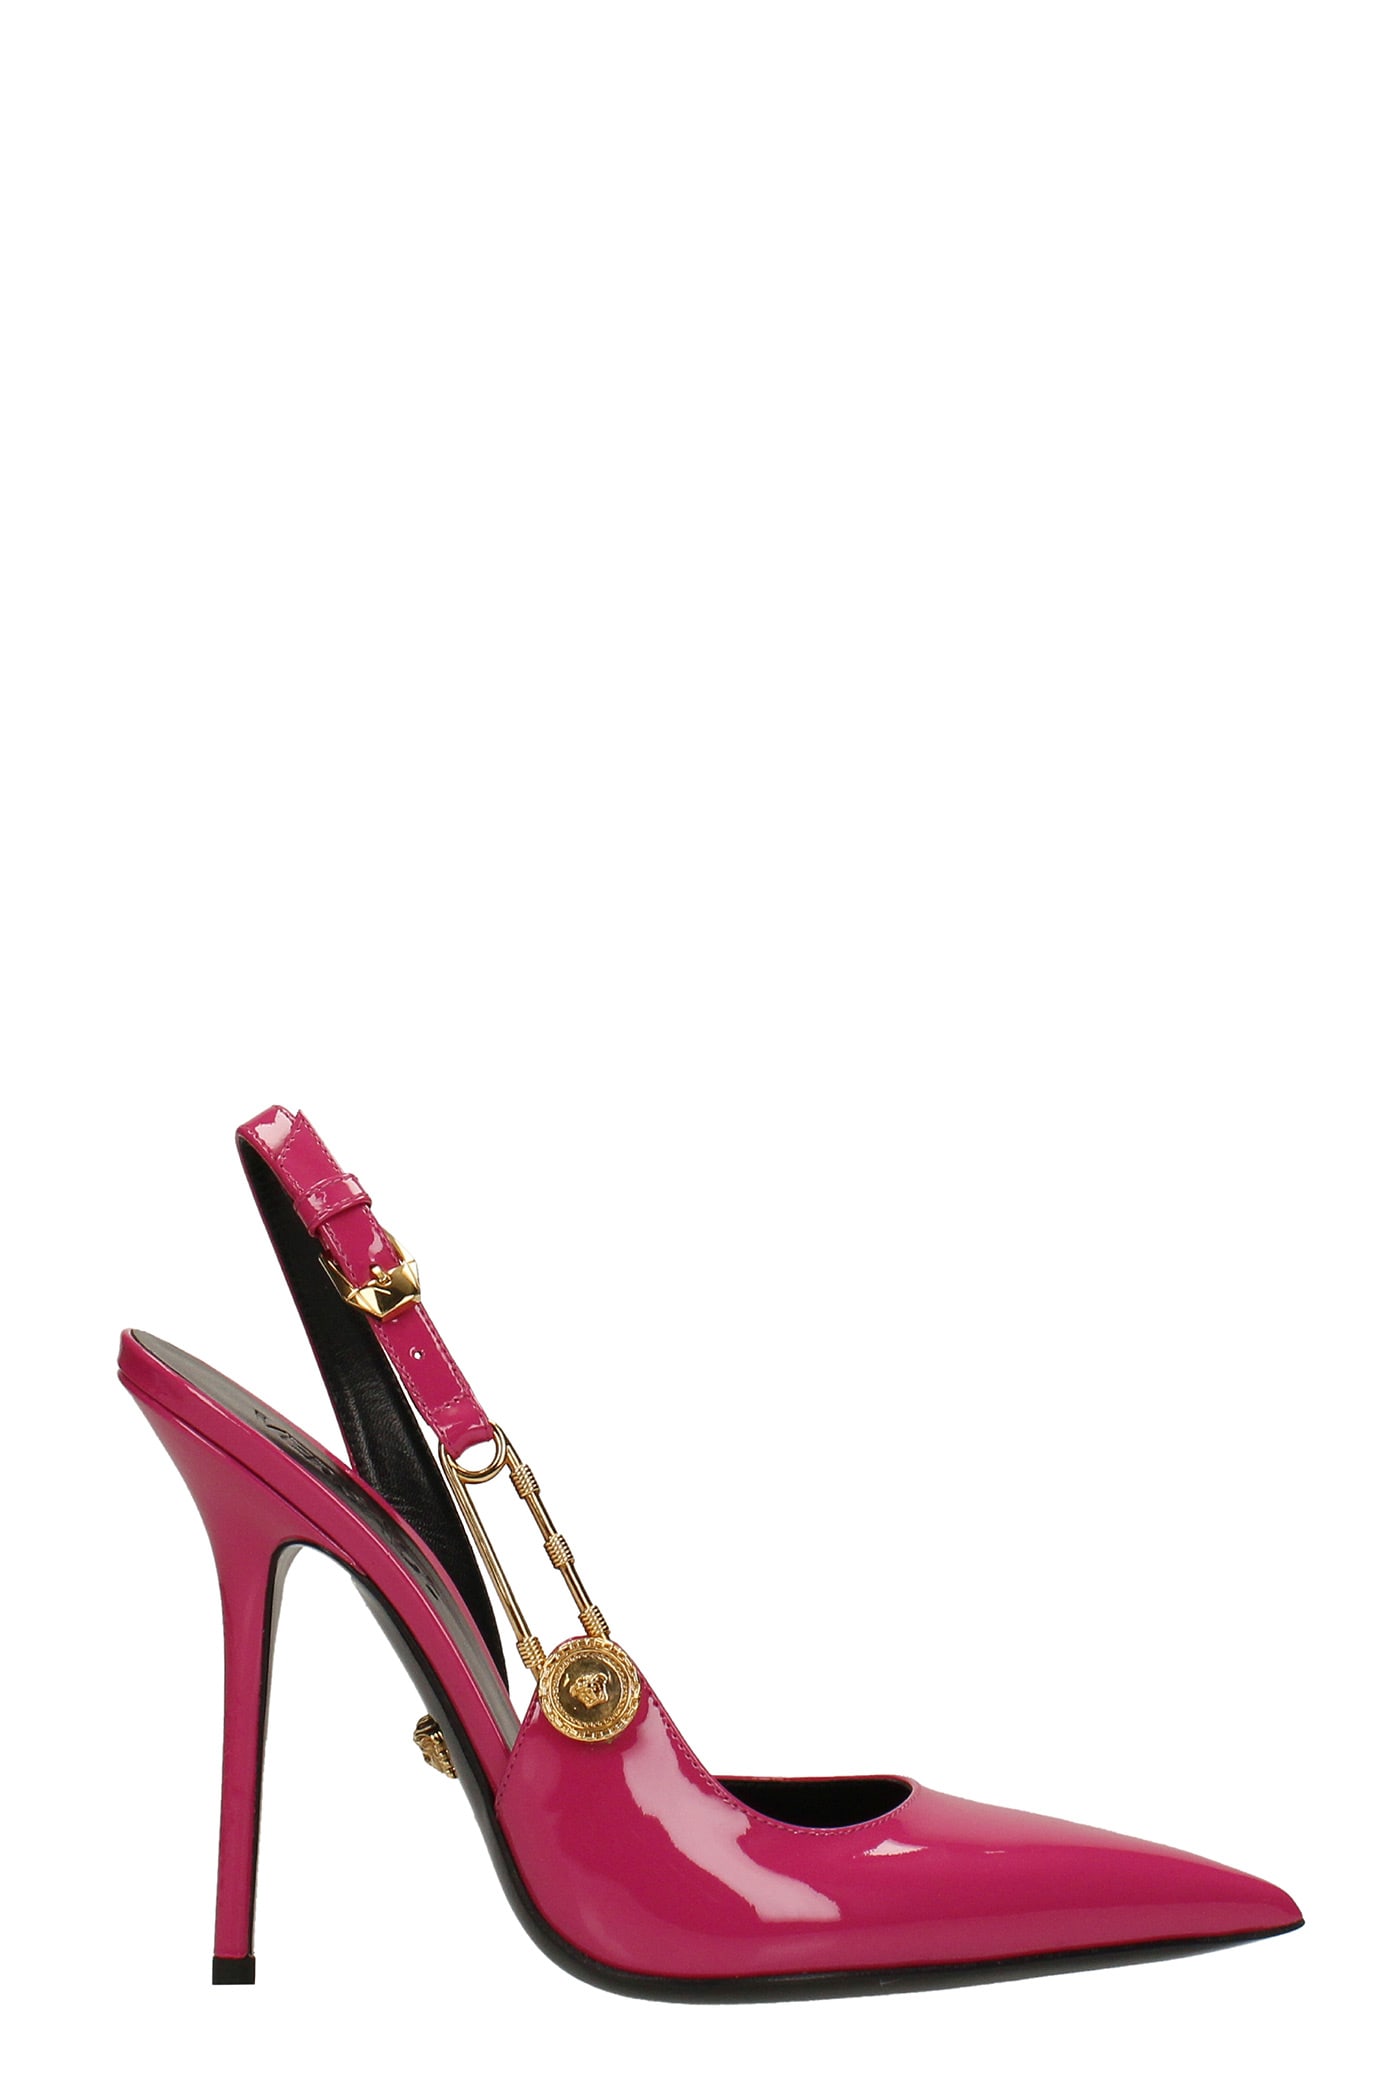 Versace Pumps In Fuxia Patent Leather